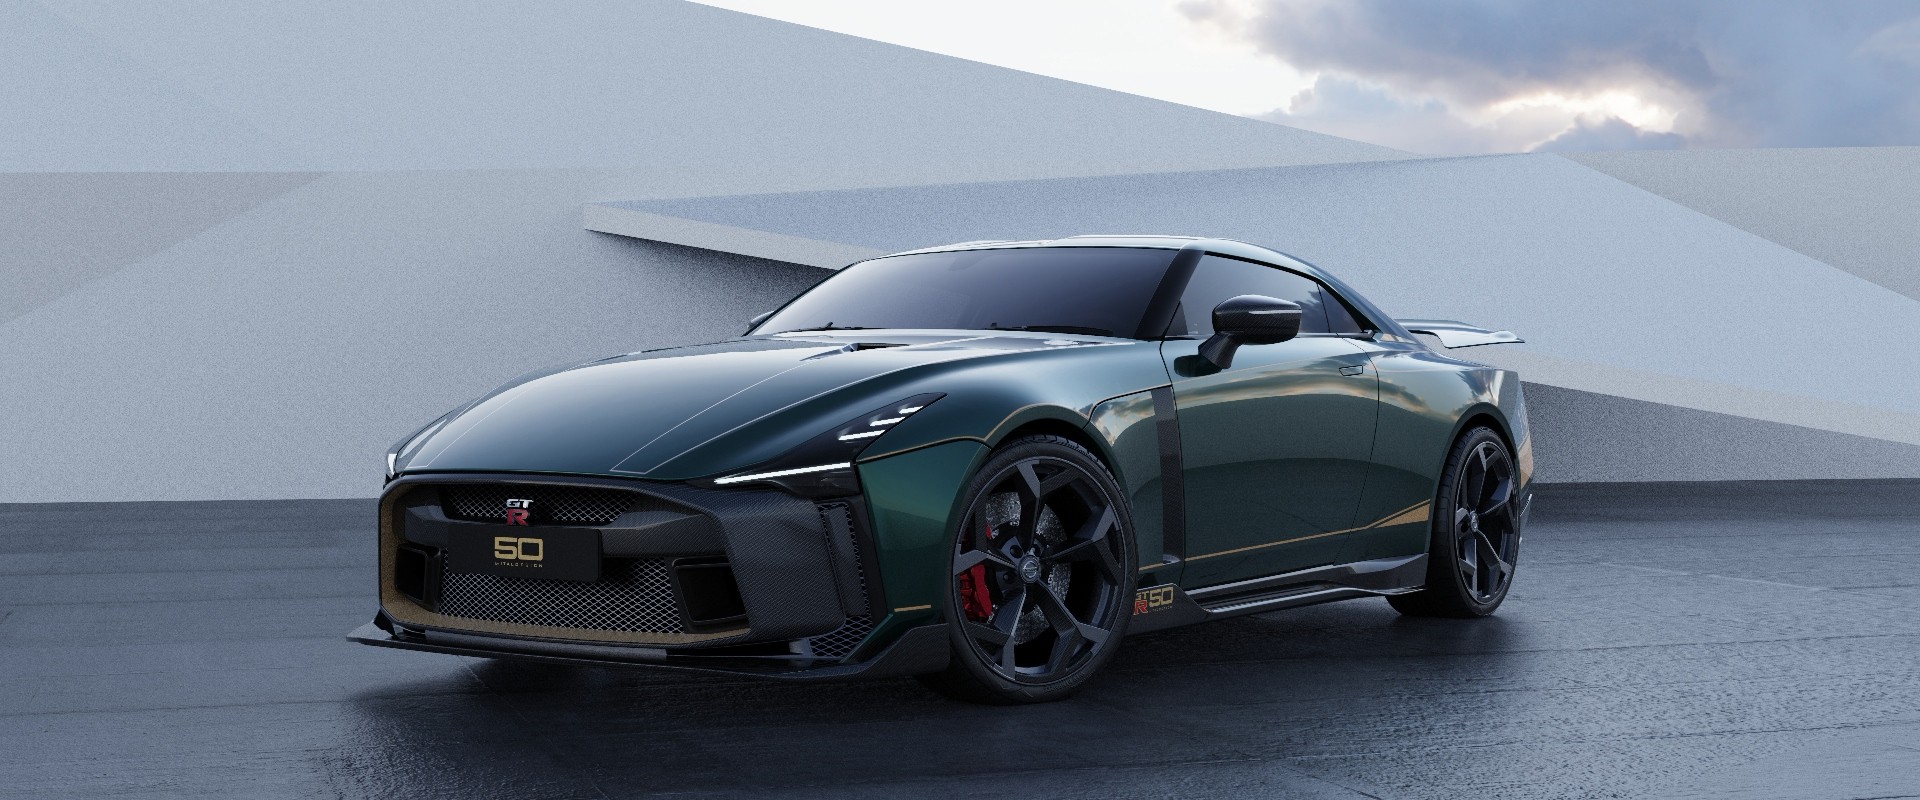 https://s1.cdn.autoevolution.com/images/news/gallery/next-generation-nissan-gt-r-rendered-looks-like-a-mid-engined-supercar_8.jpg